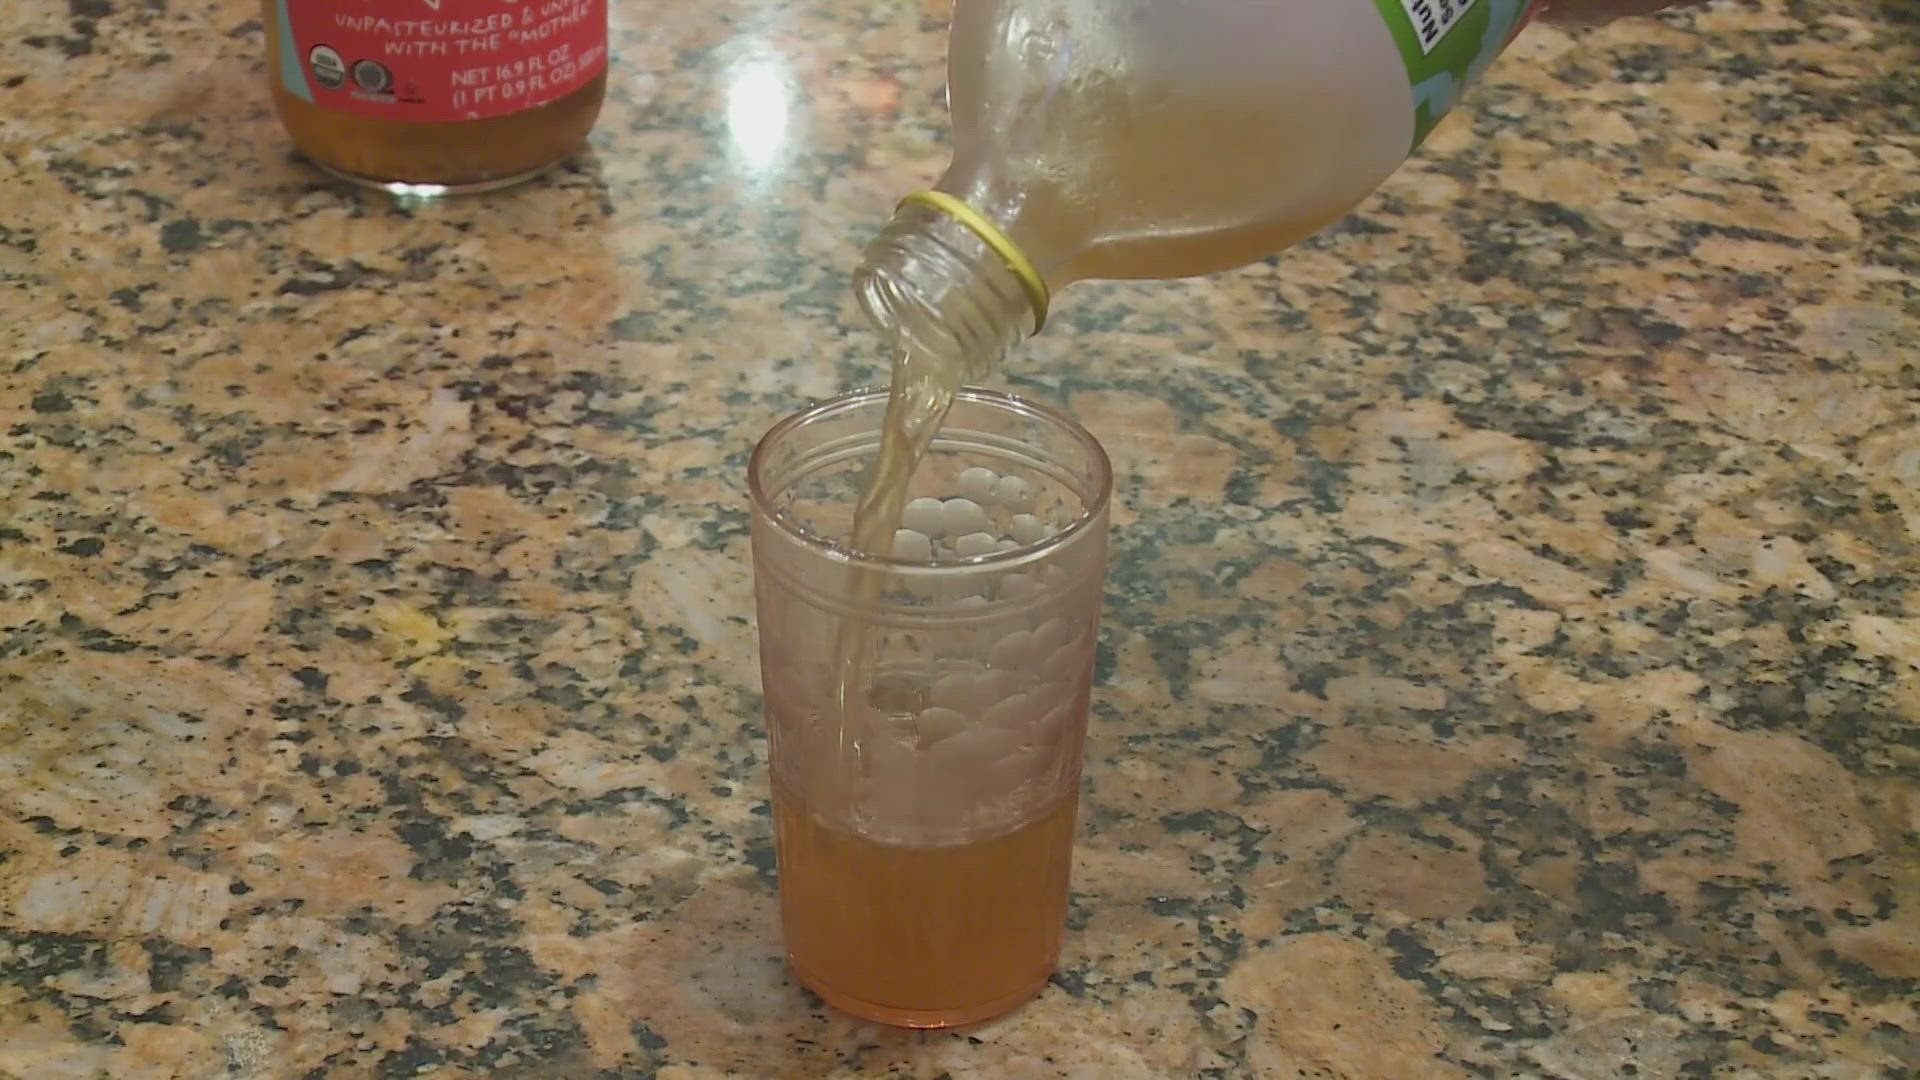 Apple cider vinegar claims to cure almost everything, but its getting the most attention about claims of weight loss.